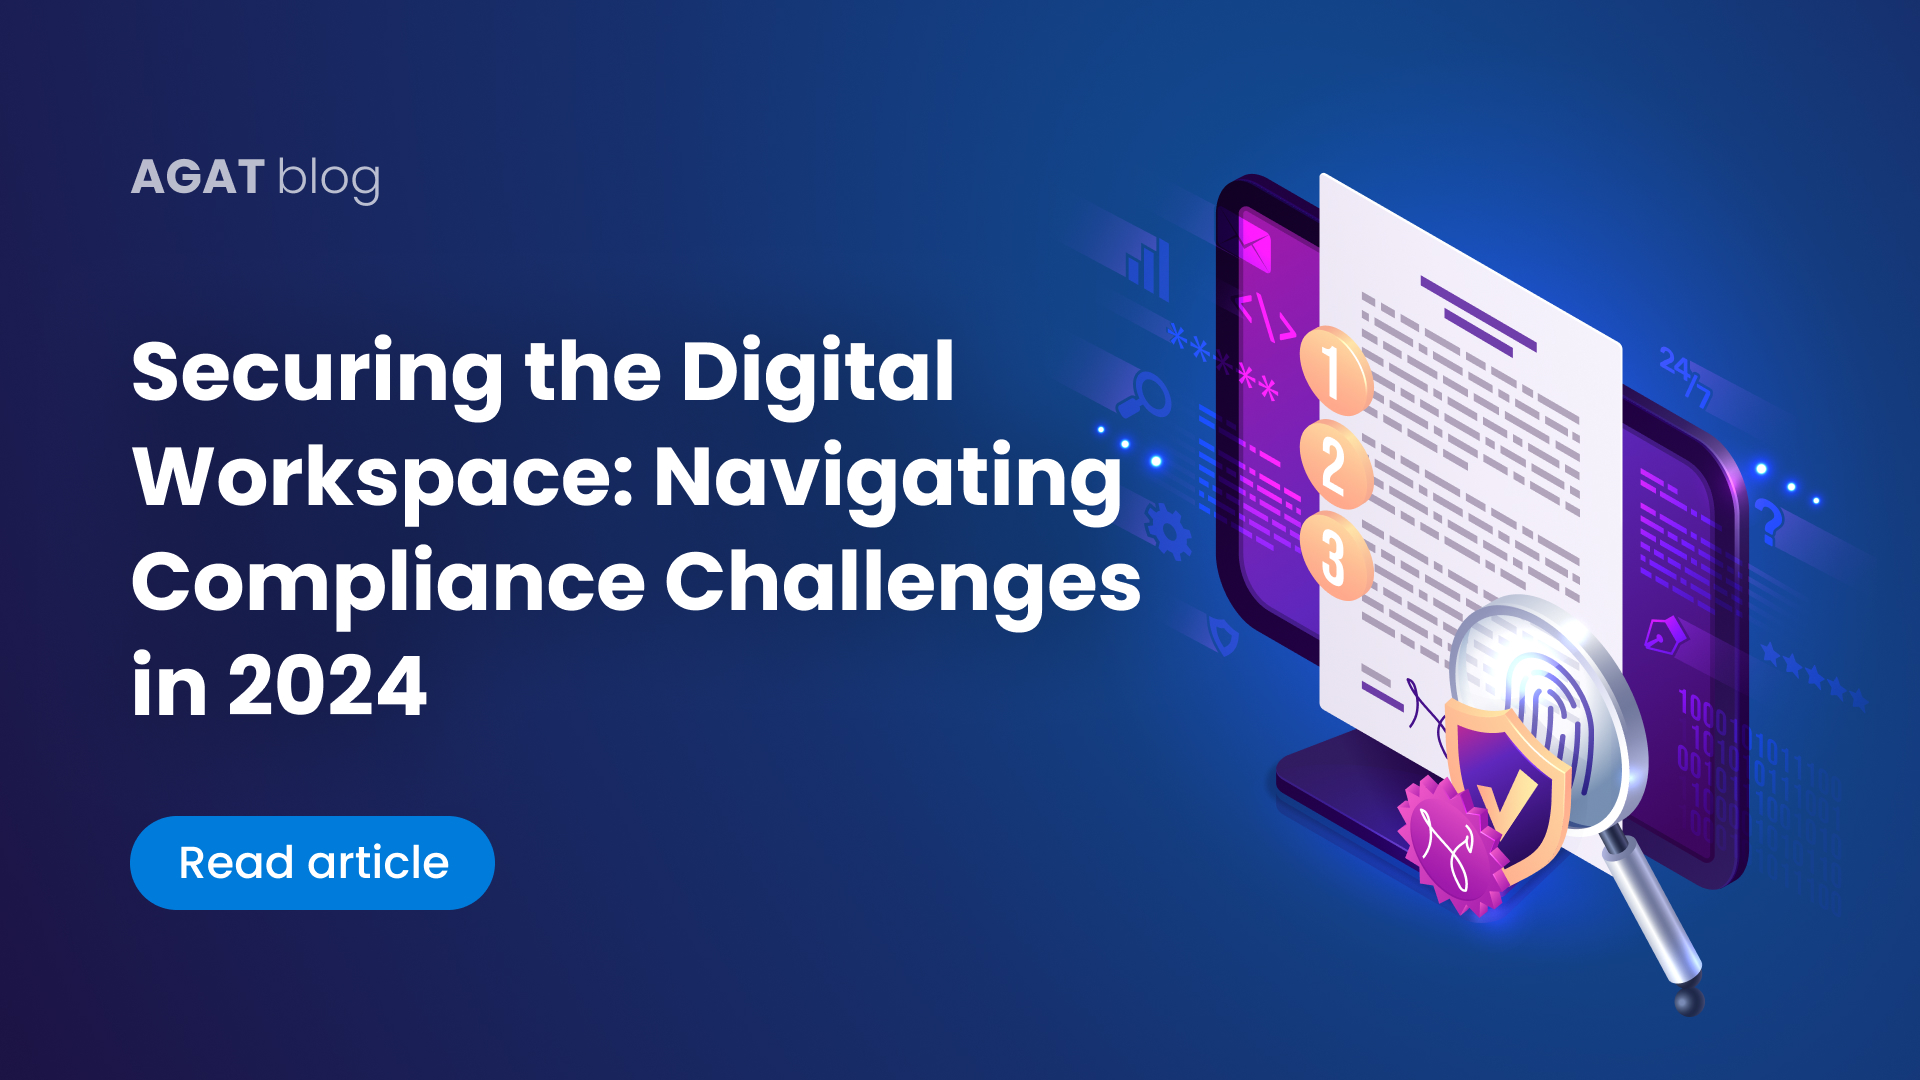 Securing the Digital Workspace: Navigating Compliance Challenges in 2024 